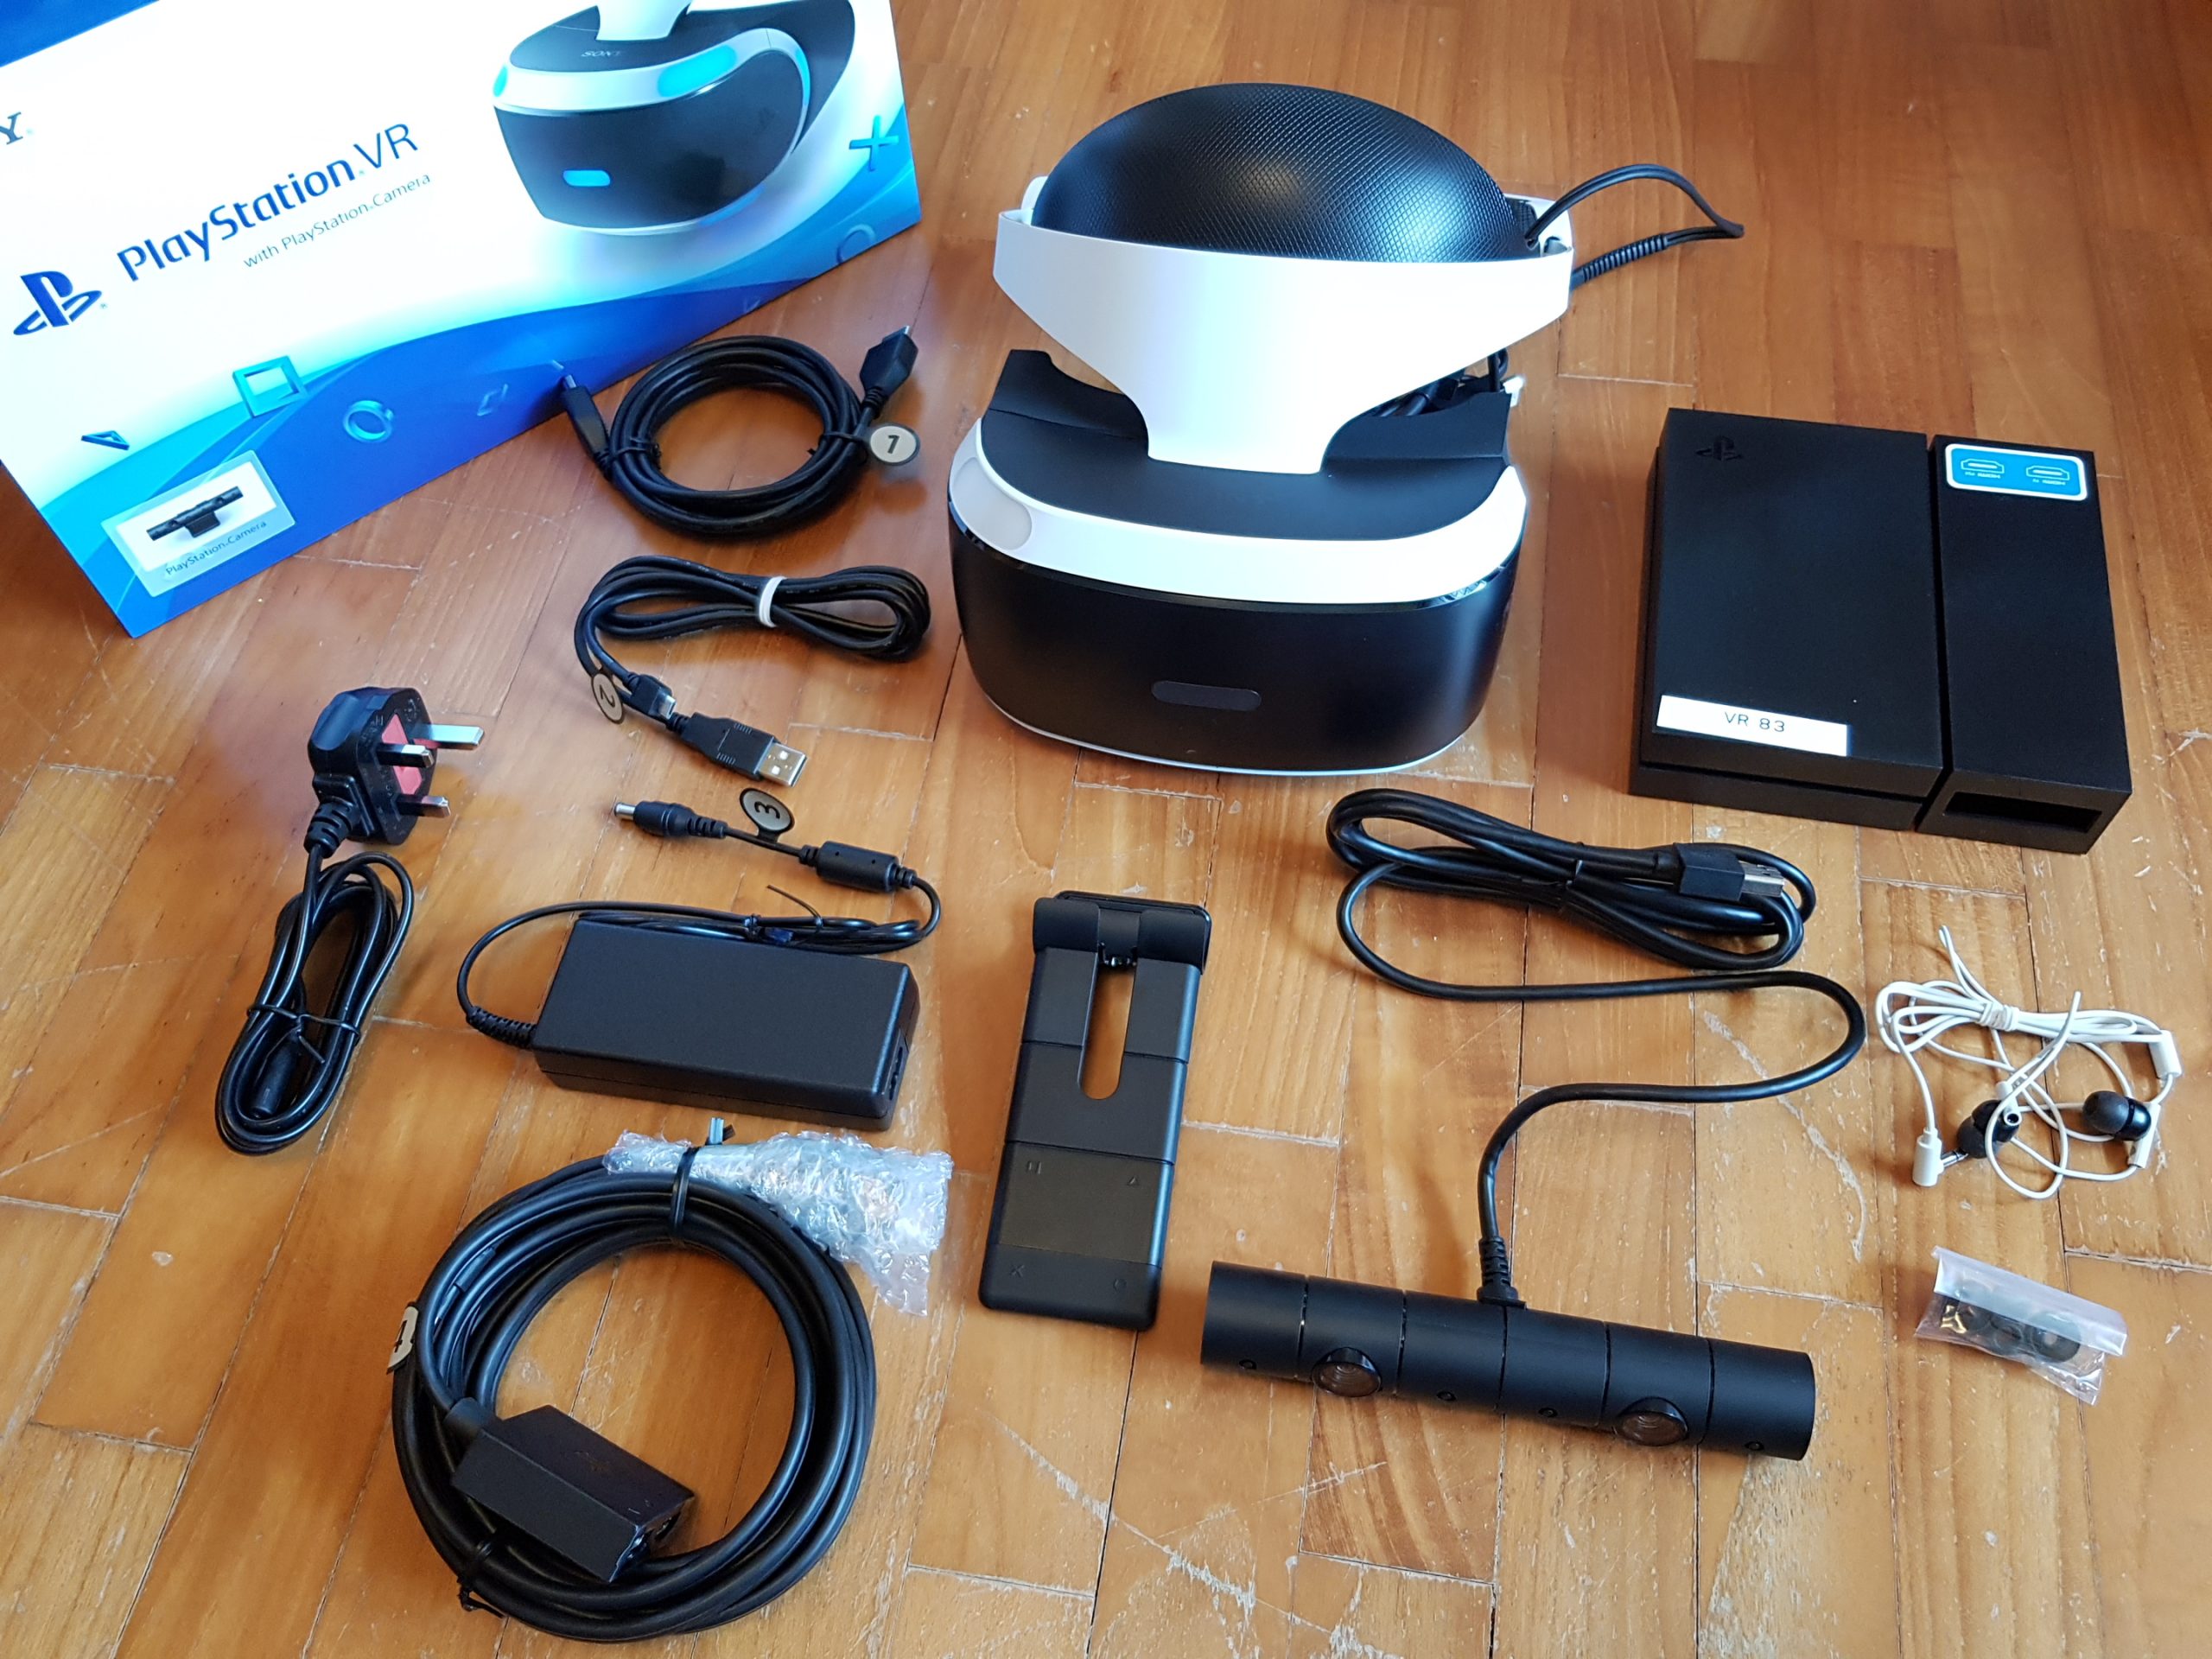 Unboxing the PlayStation VR